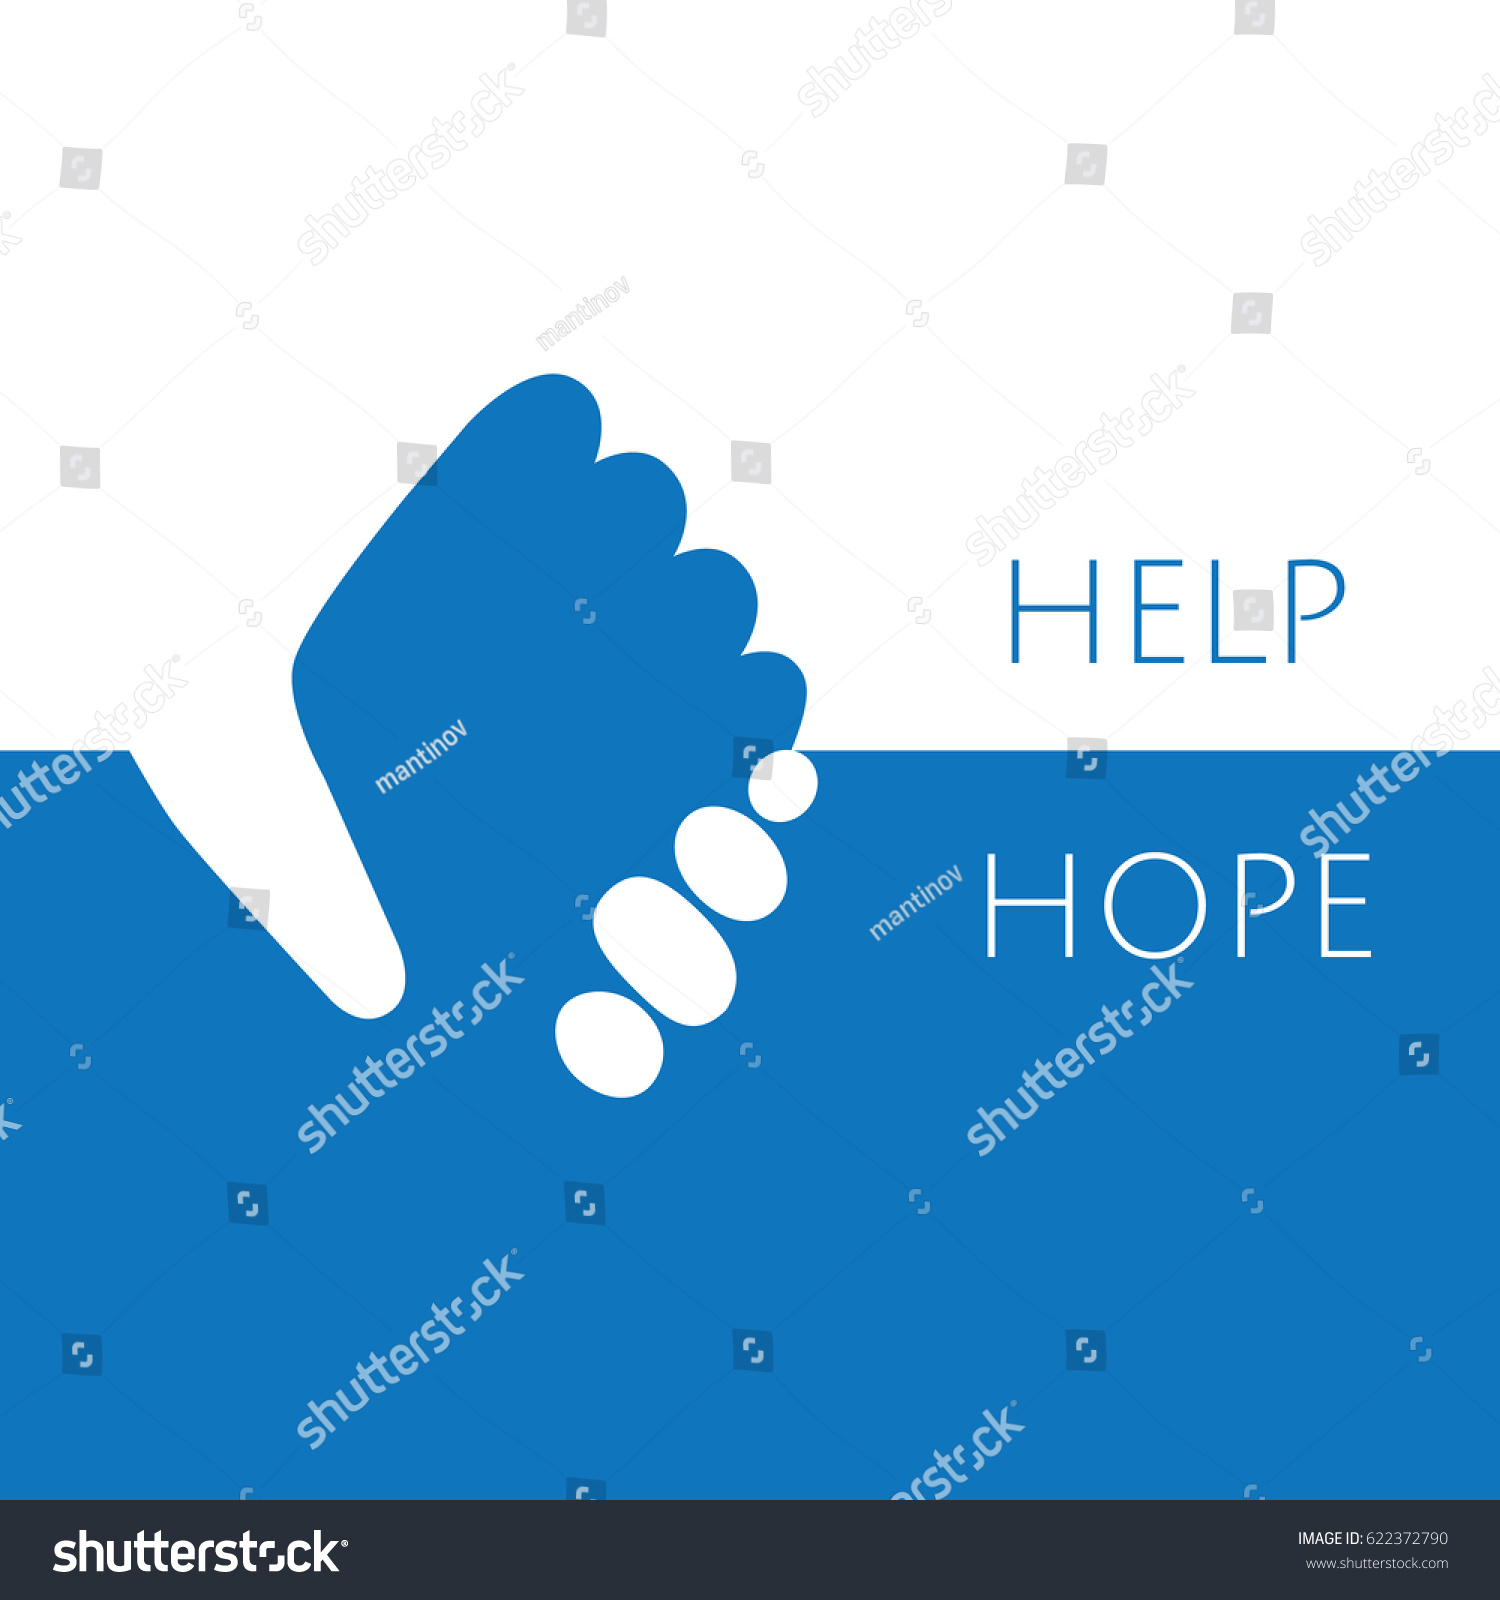 Hand holding hand for help and hope icon logo vector graphic design. #622372790